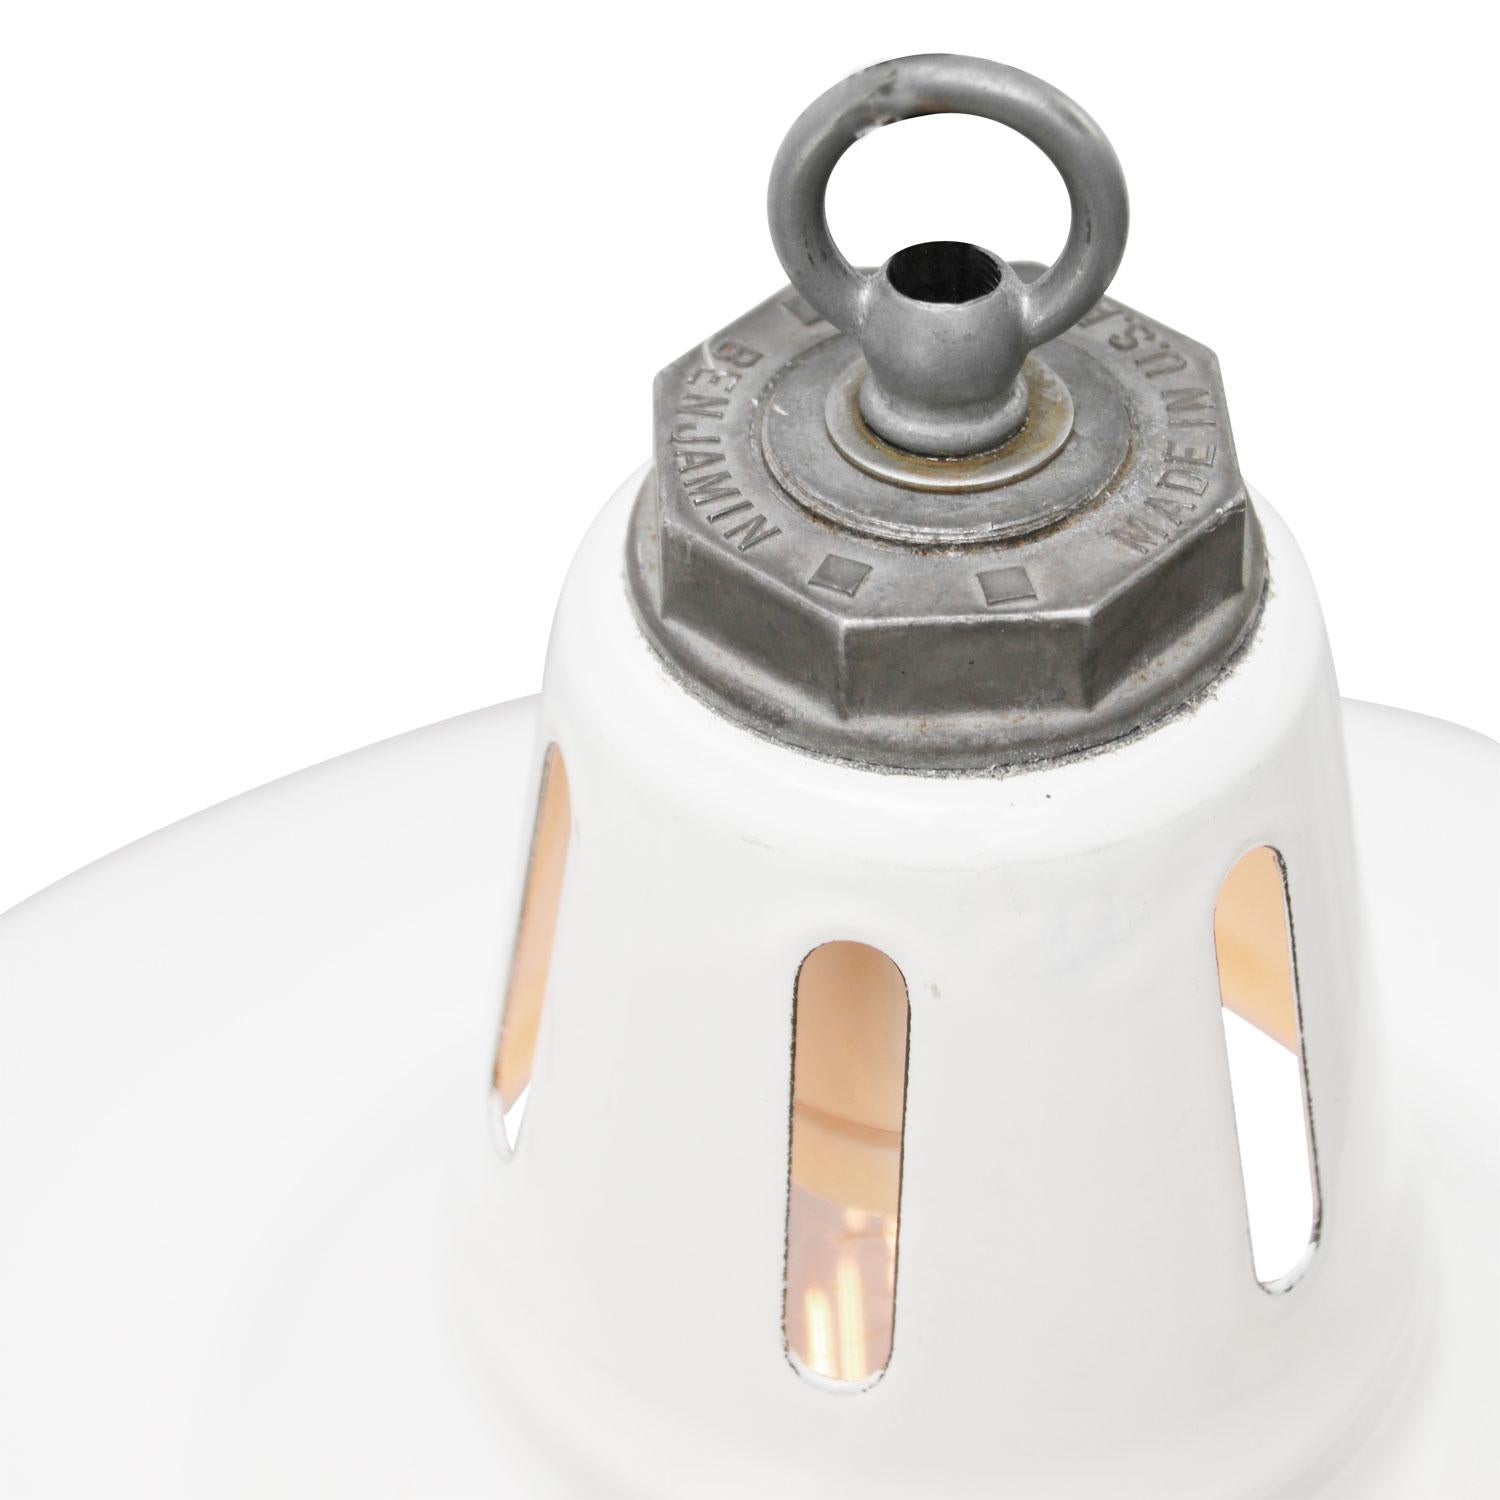 Factory American hanging lights. White enamel. White interior.

Weight 1.20 kg / 2.6 lb

Priced per individual item. All lamps have been made suitable by international standards for incandescent light bulbs, energy-efficient and LED bulbs.